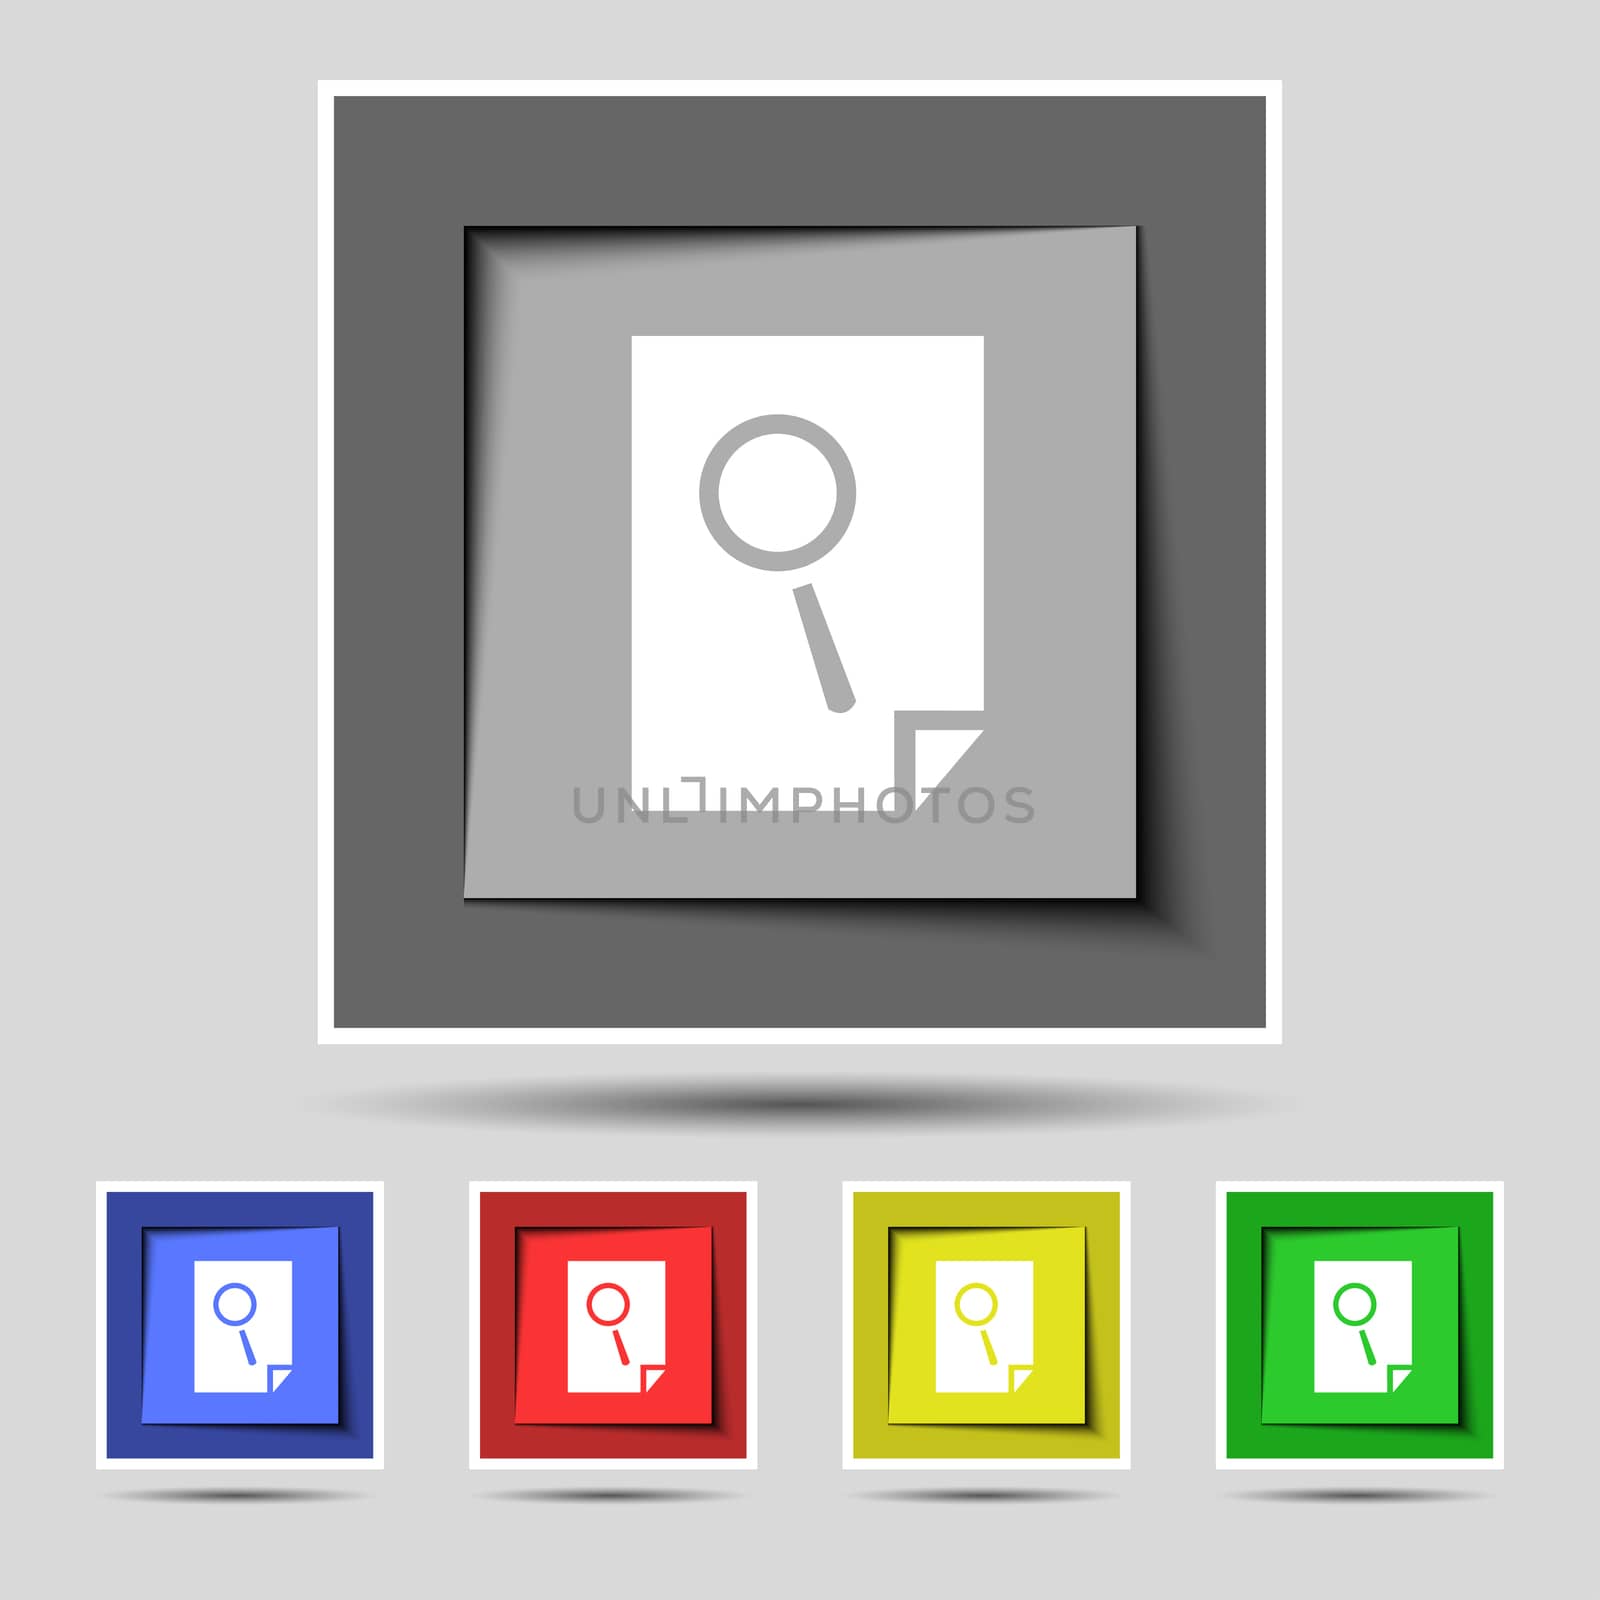 Search in file sign icon. Find in document symbol. Set of colored buttons. illustration